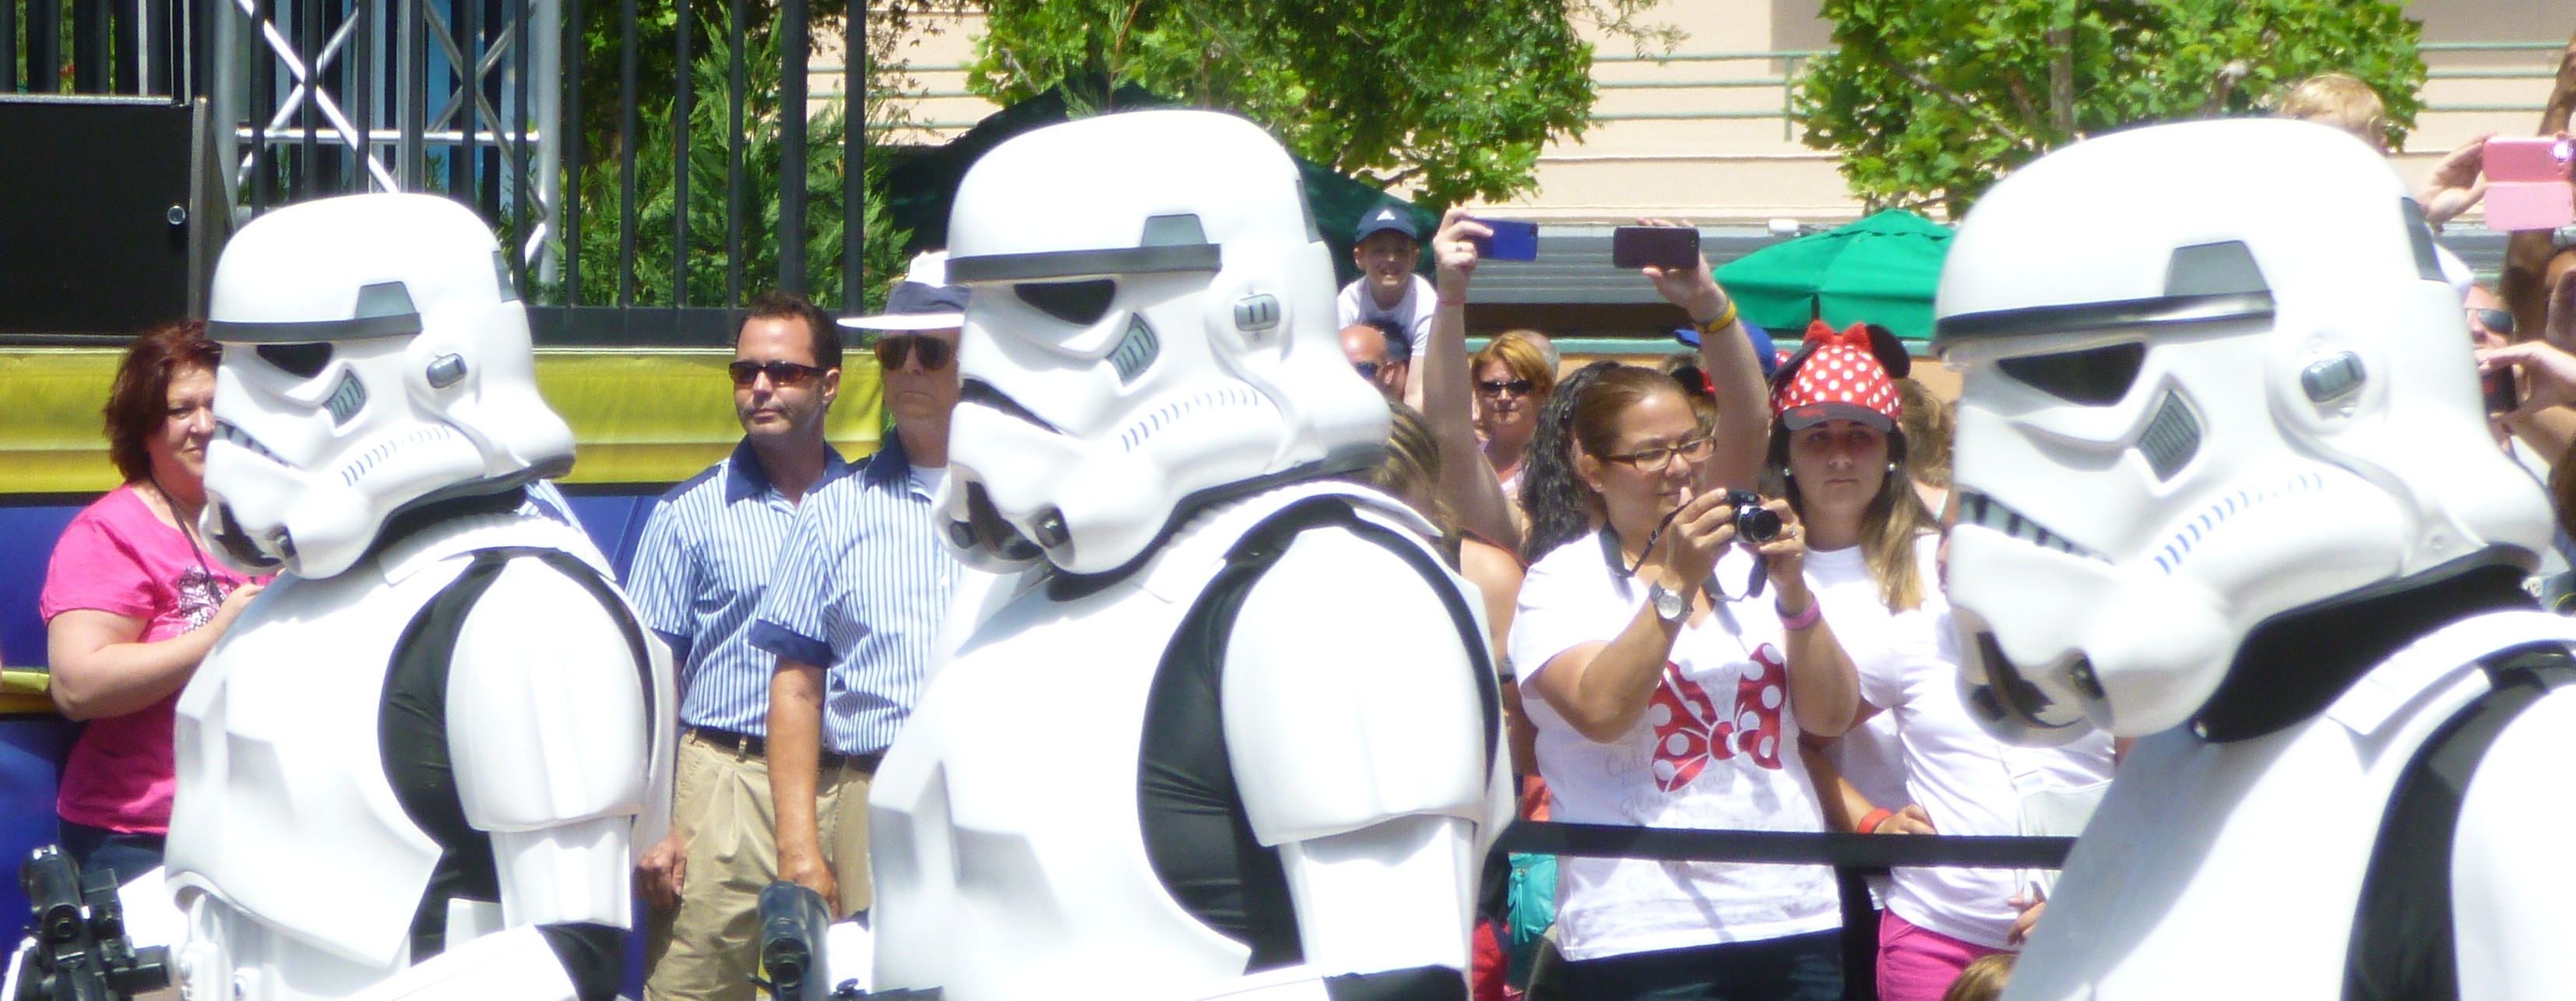 May The Magic Be With You at Star Wars Weekends in Disney’s Hollywood Studios